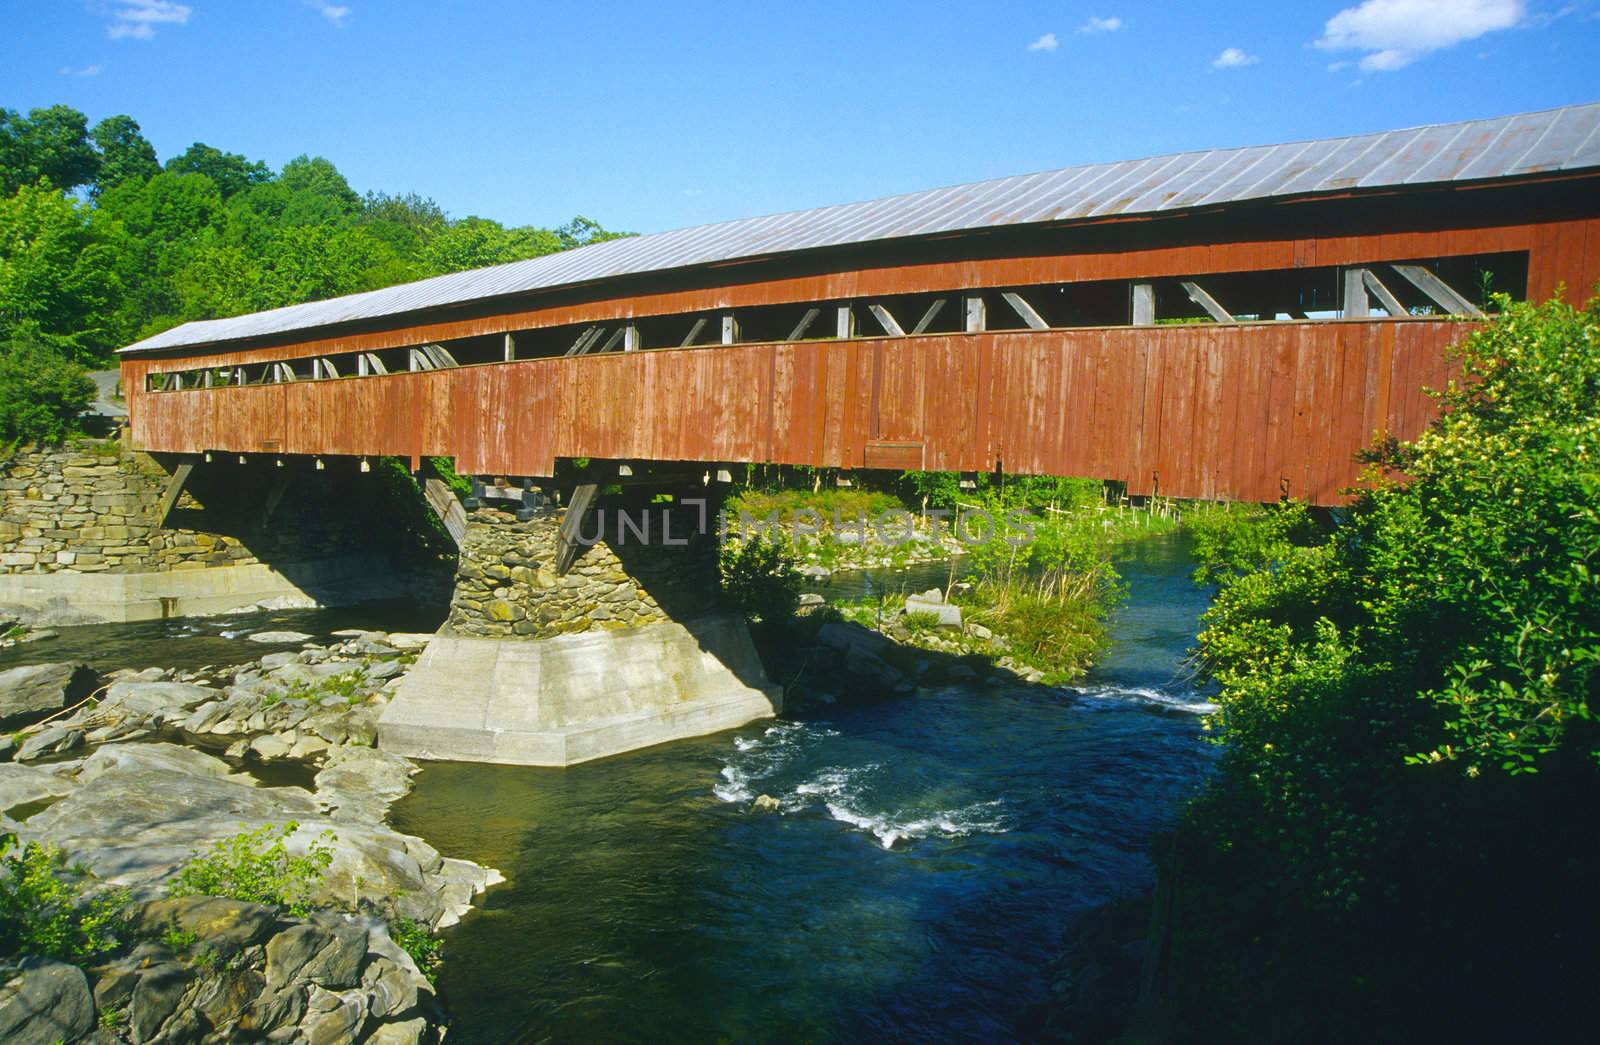 Covered bridge painted red in Taftsville, Vermont, USA